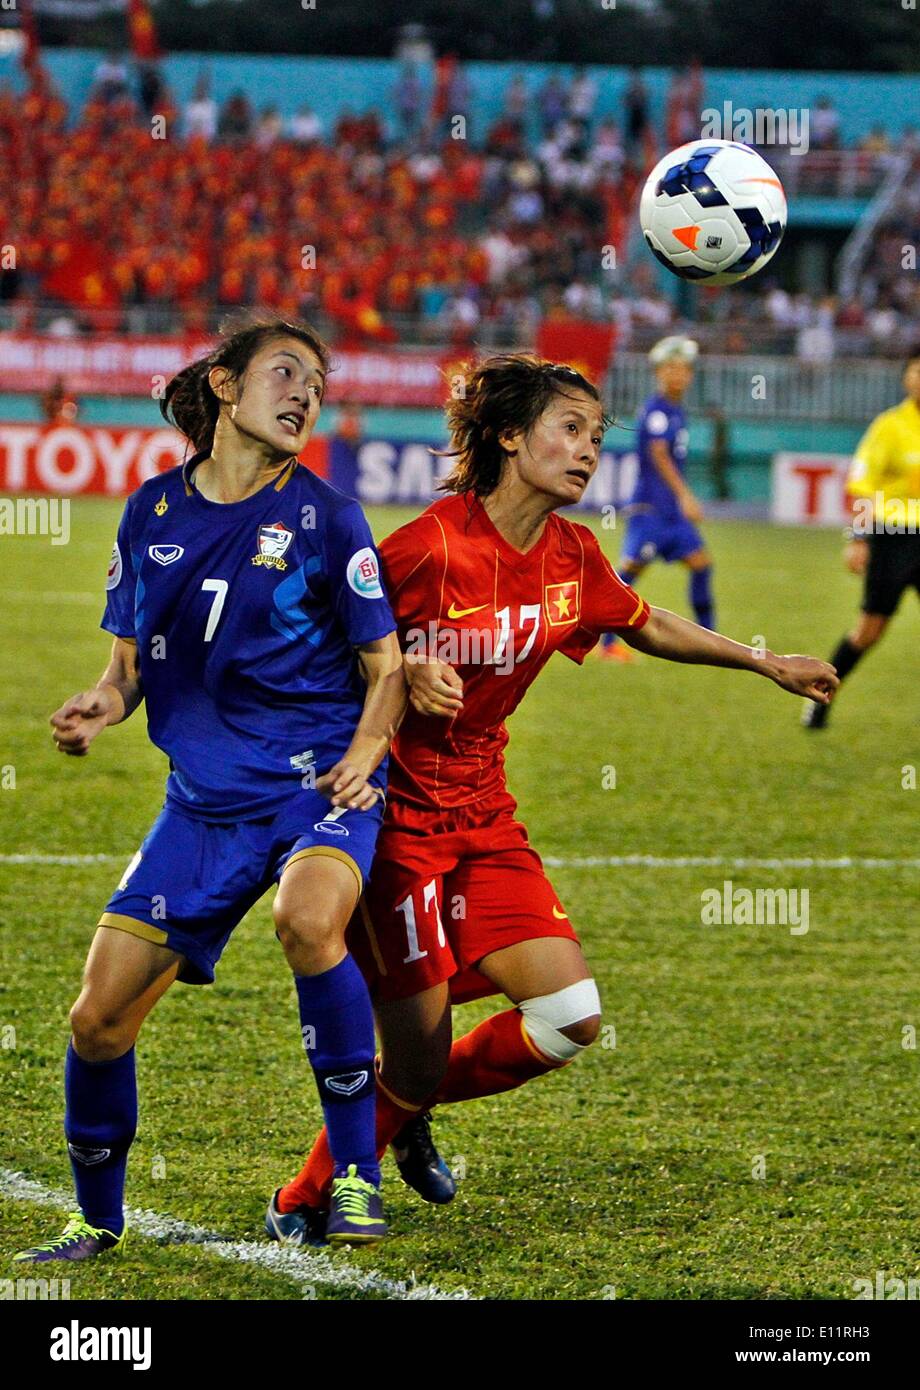 Ho Chi Minh City, Vietnam. 21st May, 2014. Intamee (L) of Thailand vies for the ball during the match against Vietnam at the 2014 Women's AFC Cup held at Thong Nhat Stadium in Ho Chi Minh city, Vietnam, May 21, 2014. Thailand advanced to 2015 World Cup after beating Vietnam 2-1. © Nguyen Le Huyen/Xinhua/Alamy Live News Stock Photo